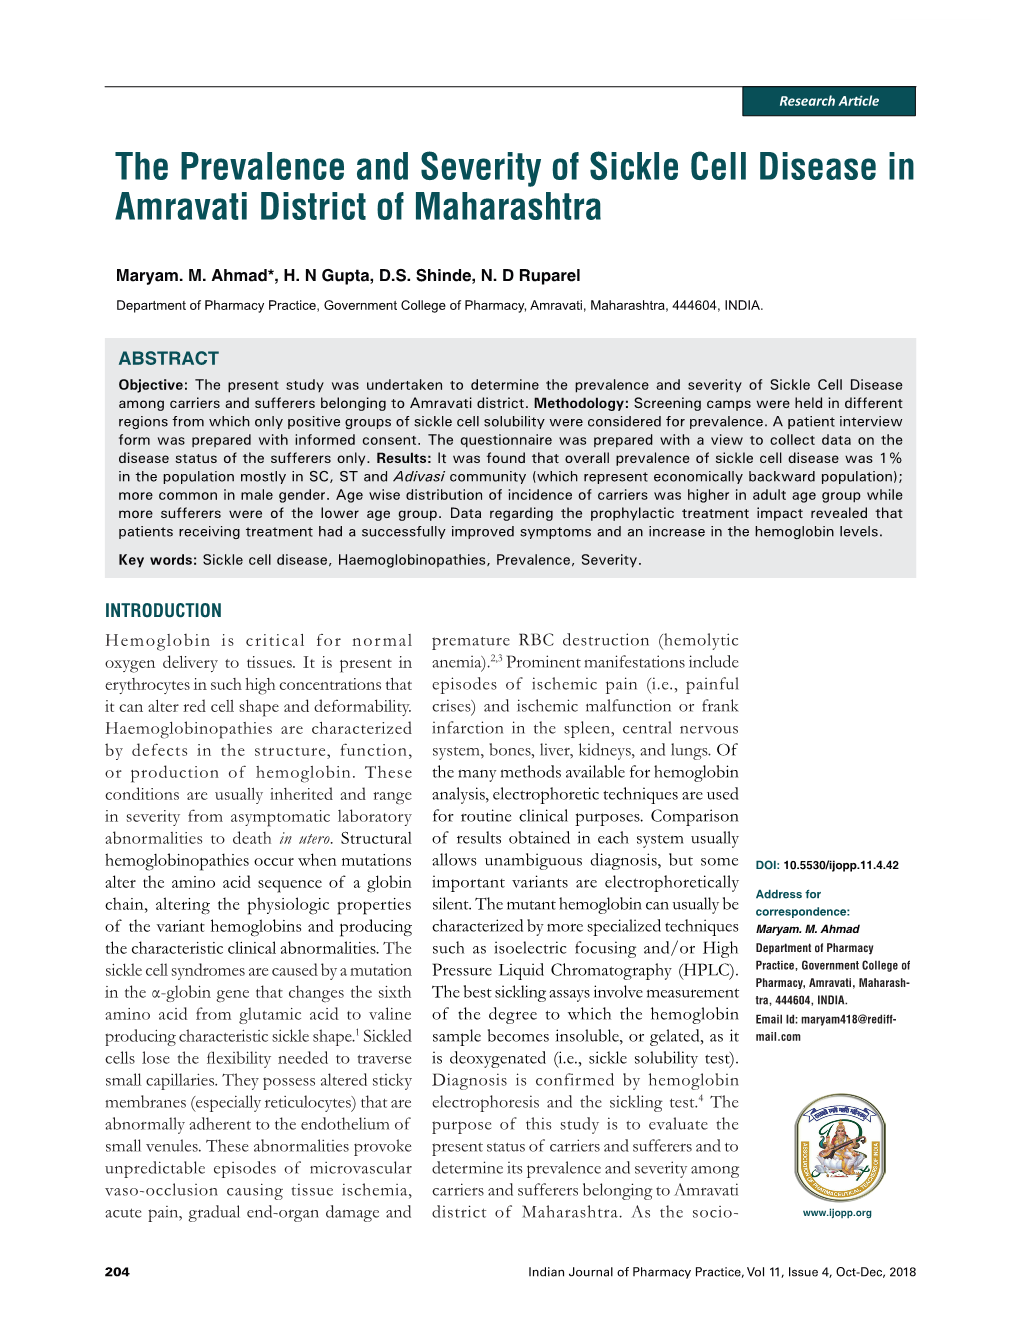 The Prevalence and Severity of Sickle Cell Disease in Amravati District of Maharashtra